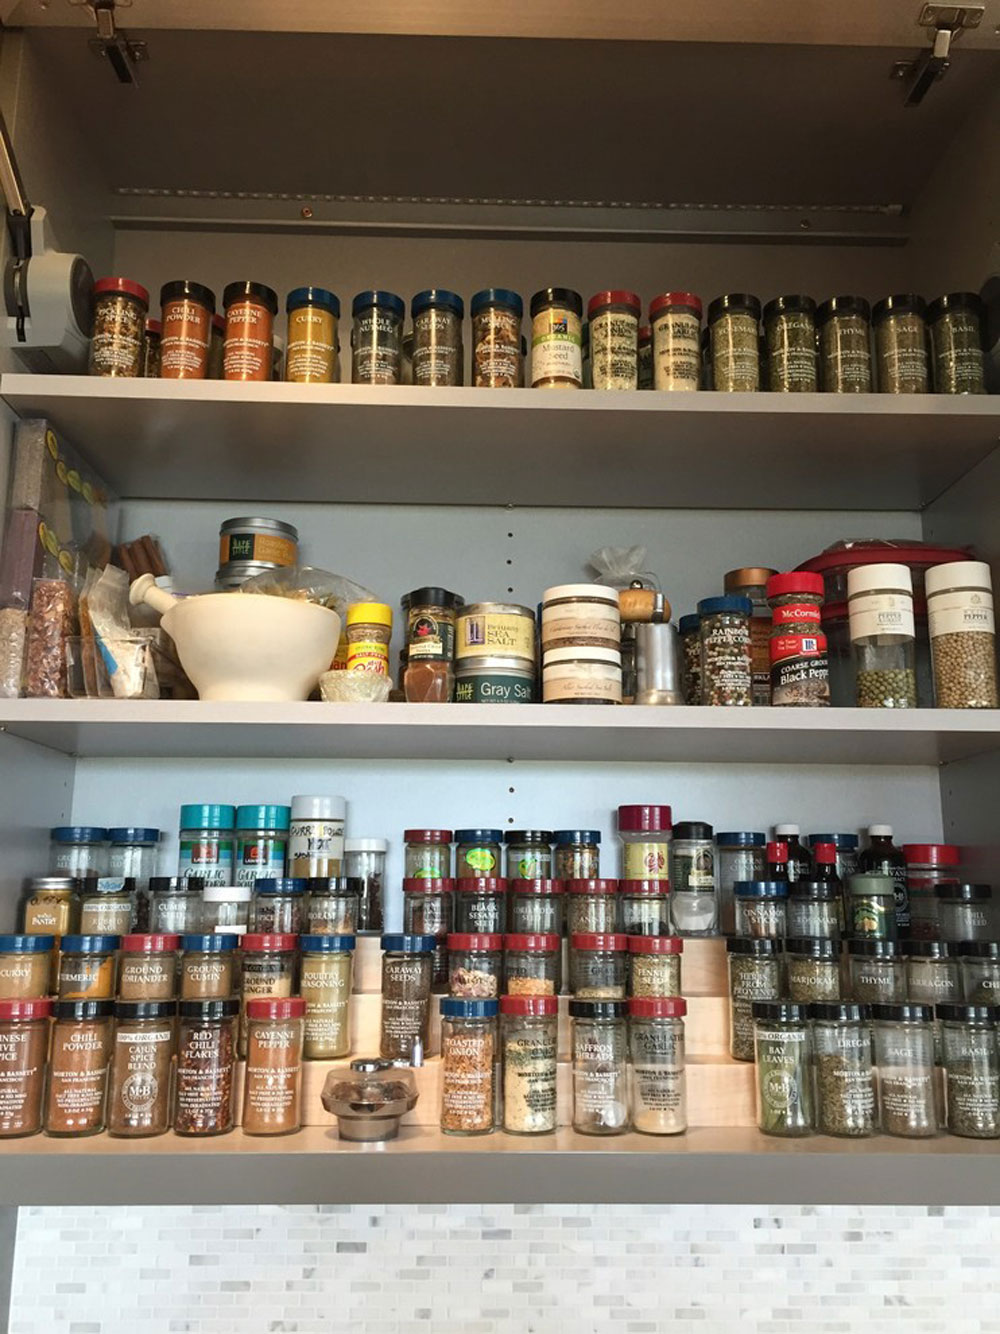 Colorados-Kitchen-Organization-Professionals-by-Organization-Relocation-1 Use these spice rack ideas to store spices brilliantly